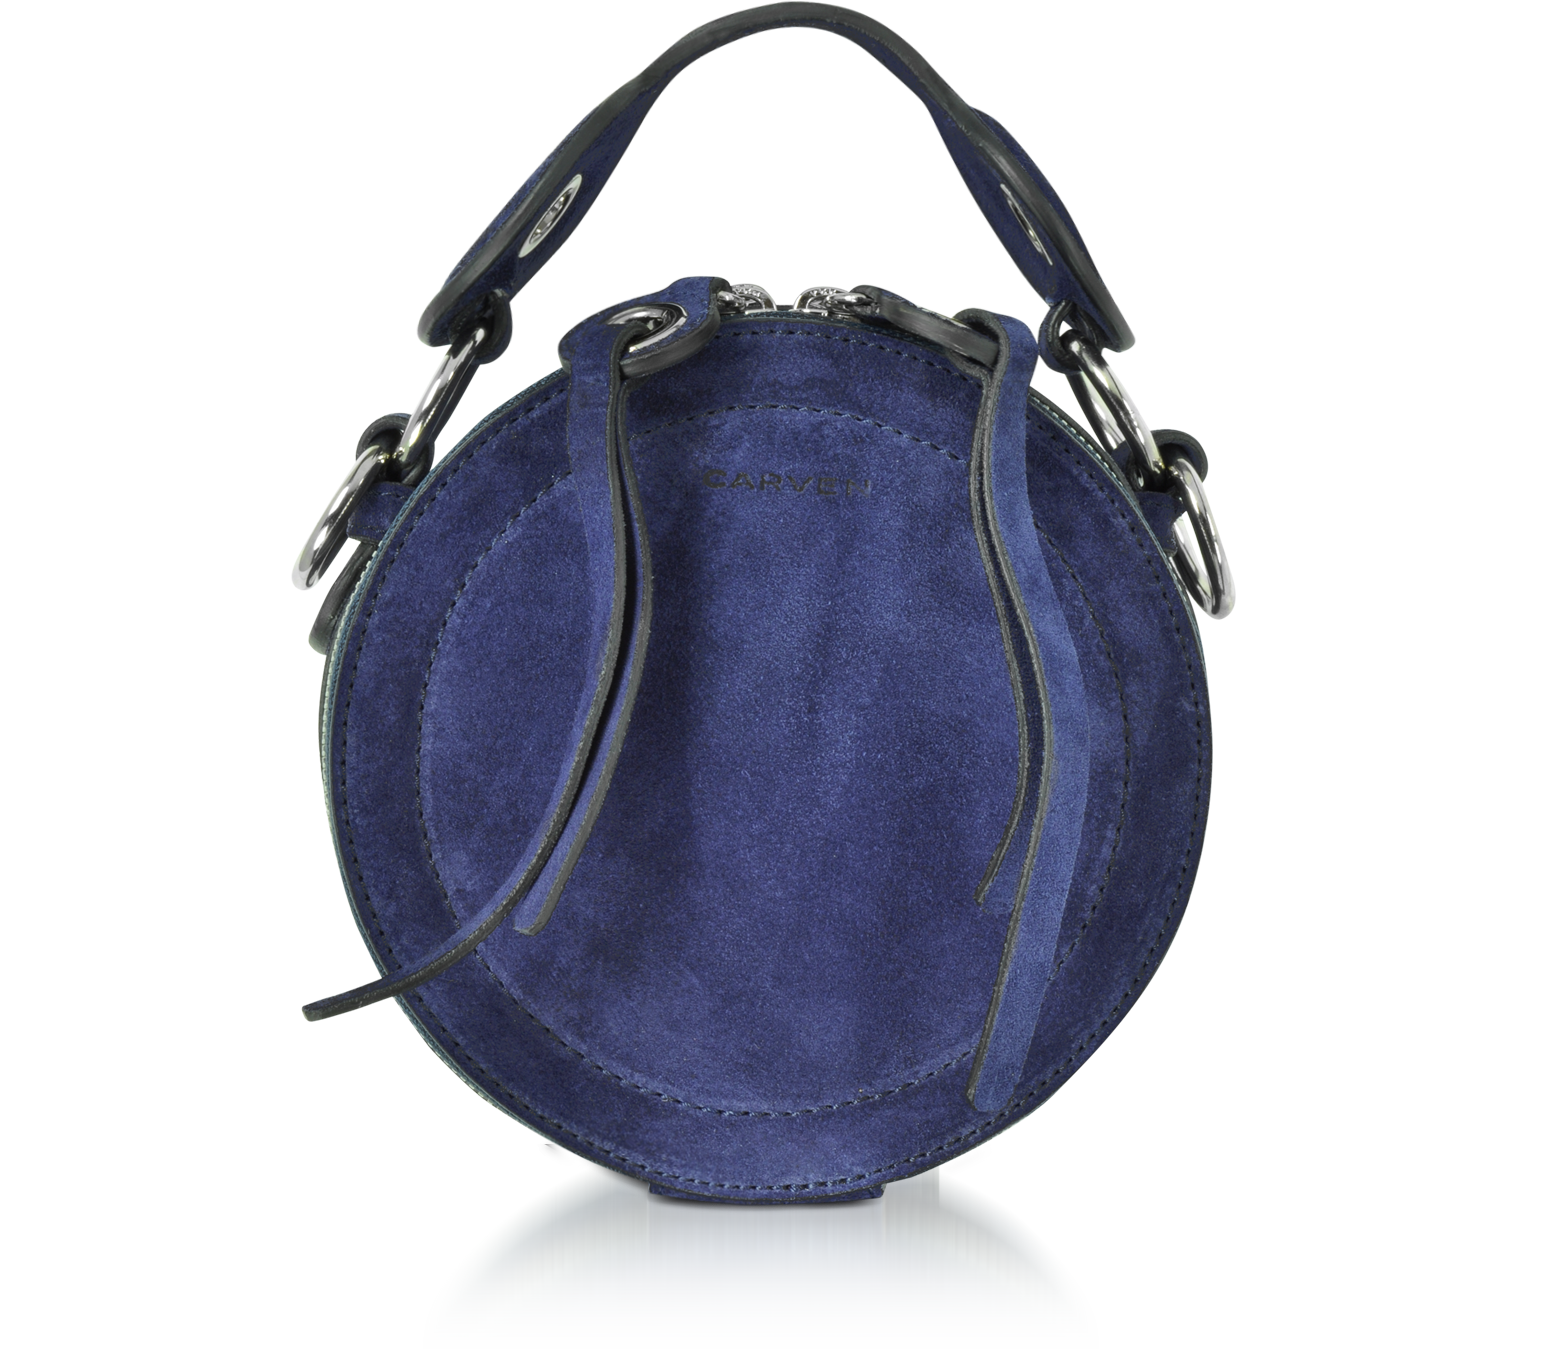 Carven Orsay Navy Blue Suede Round Crossbody Bag at FORZIERI